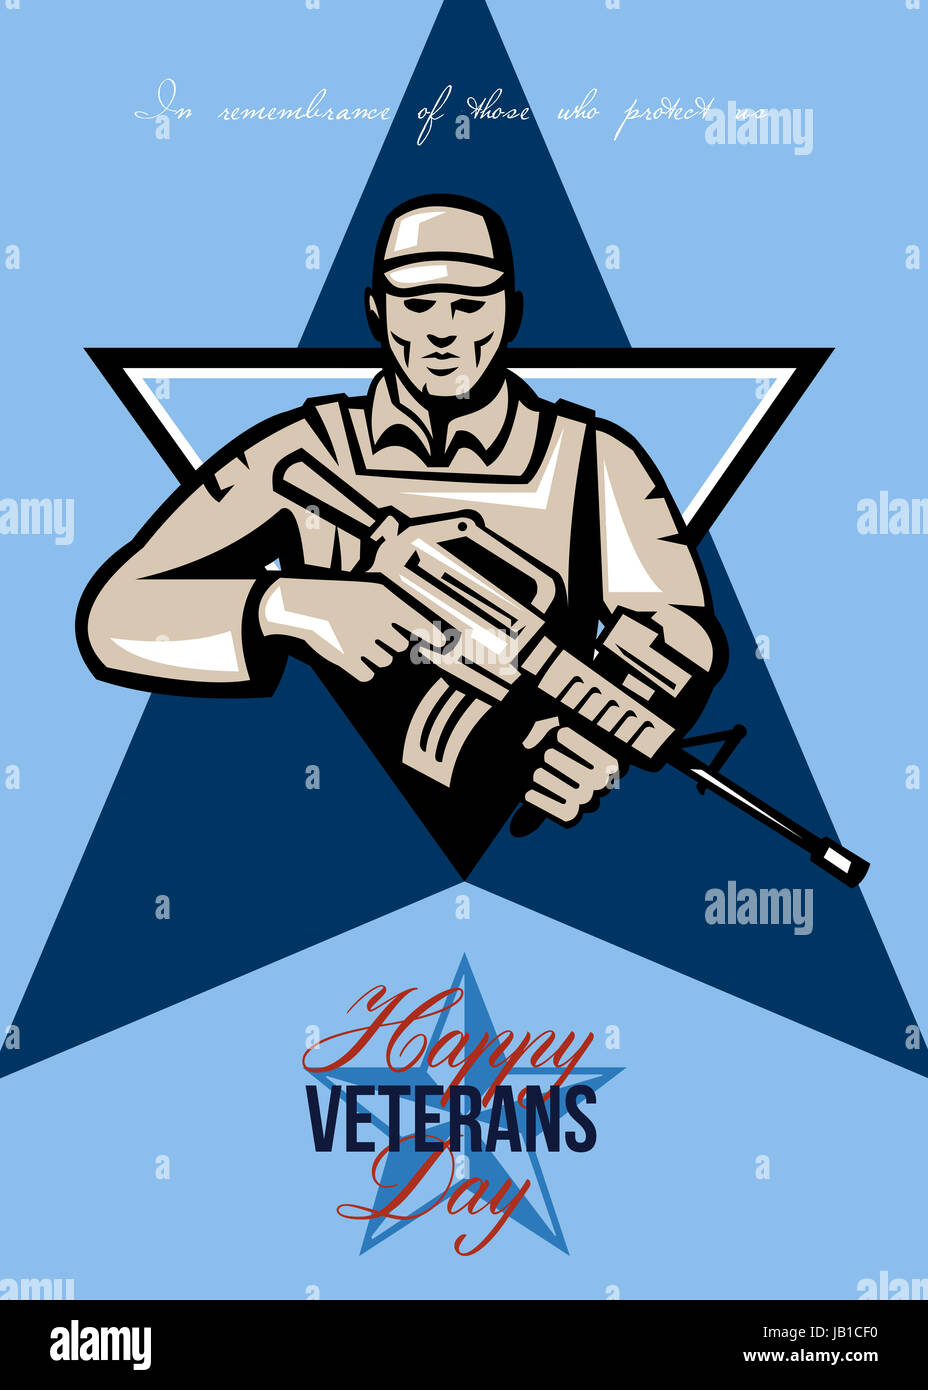 Greeting card poster showing illustration of an American soldier serviceman with assault rifle facing front set inside shield crest with words Happy Veterans day. Stock Photo